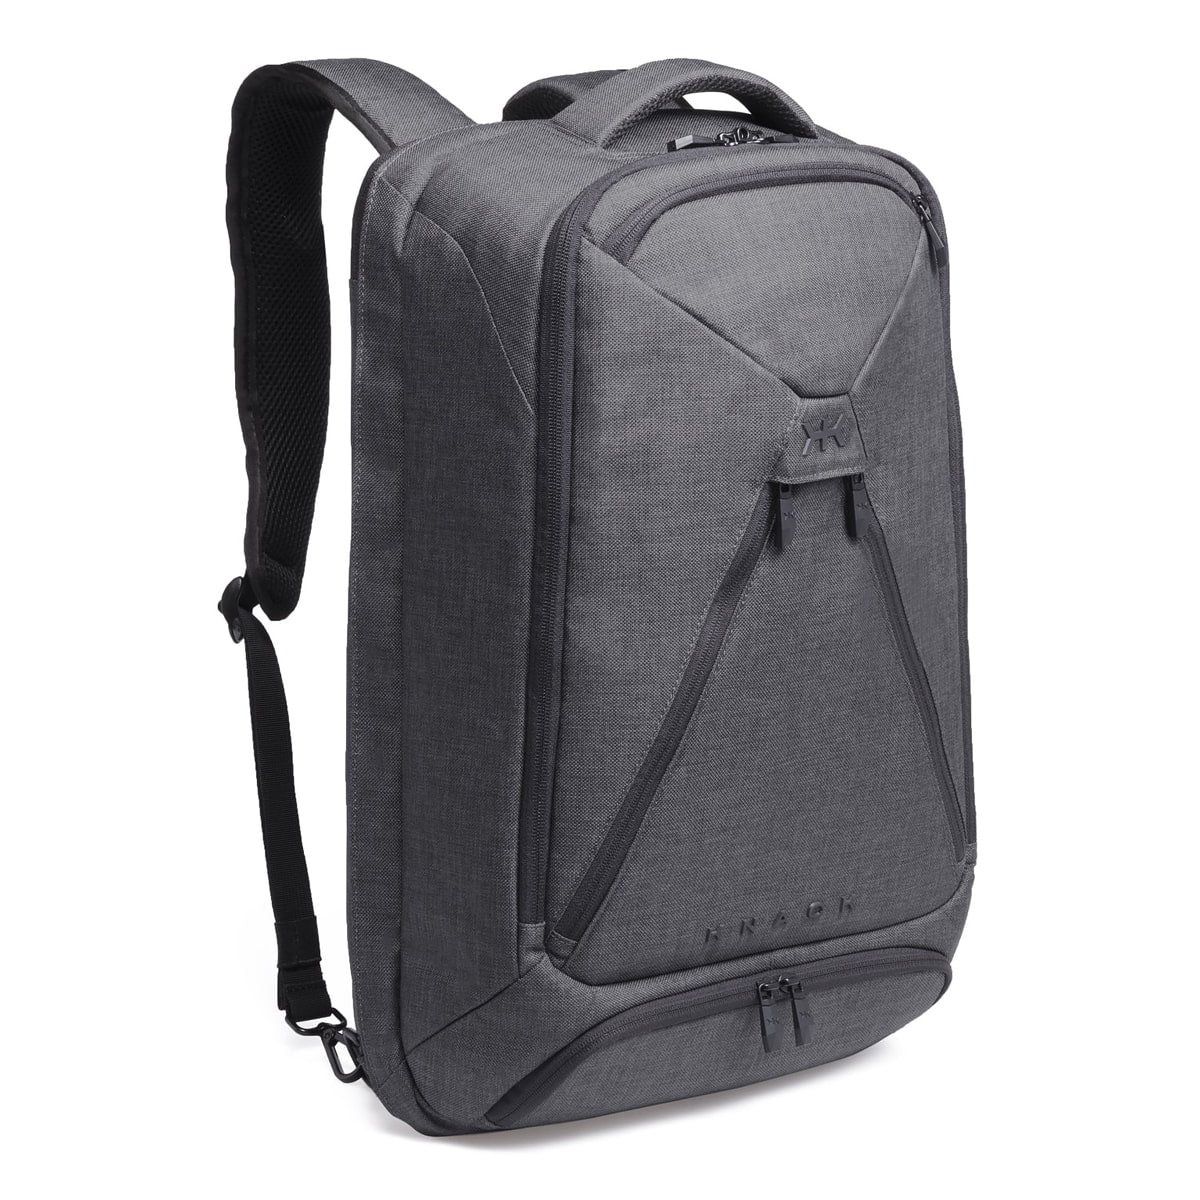 Best Expandable Backpack